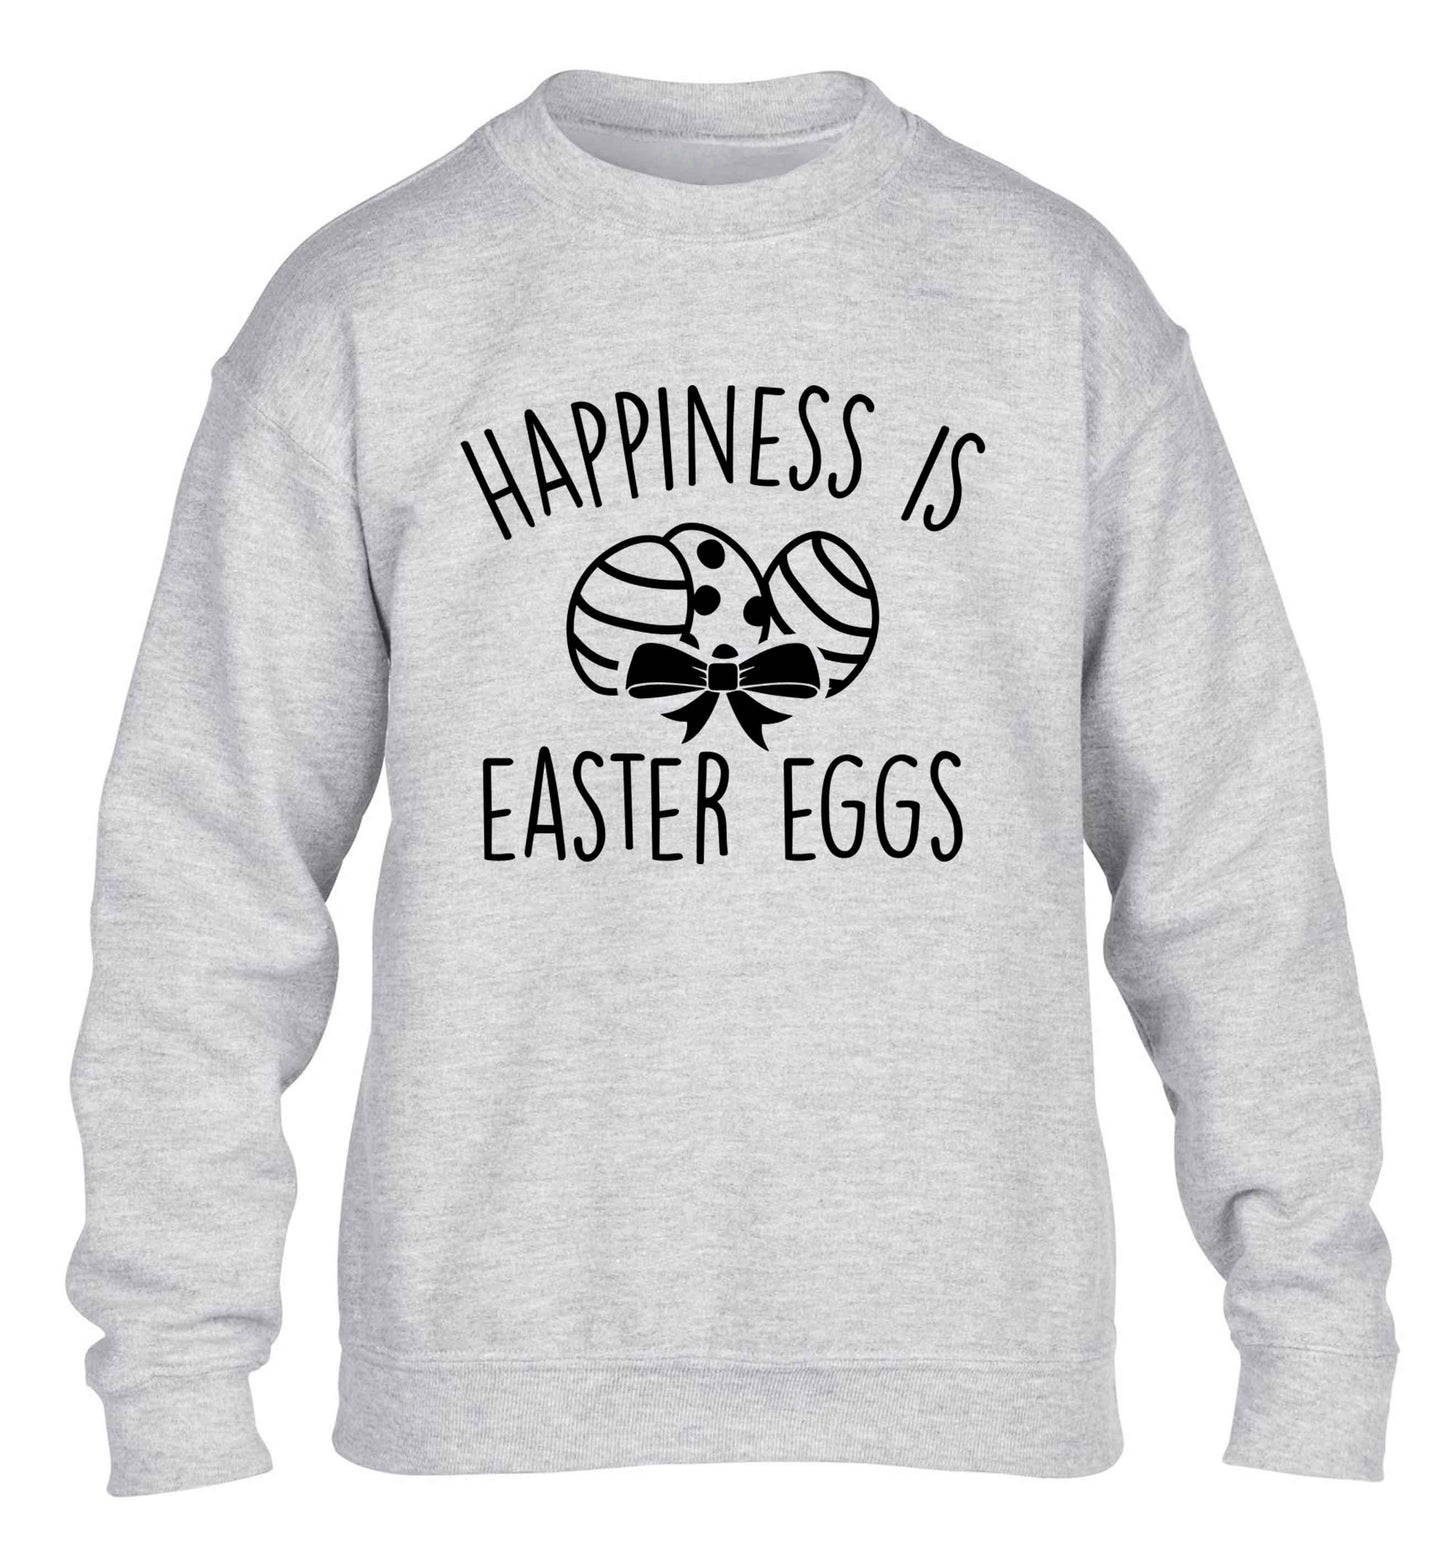 Happiness is Easter eggs children's grey sweater 12-13 Years